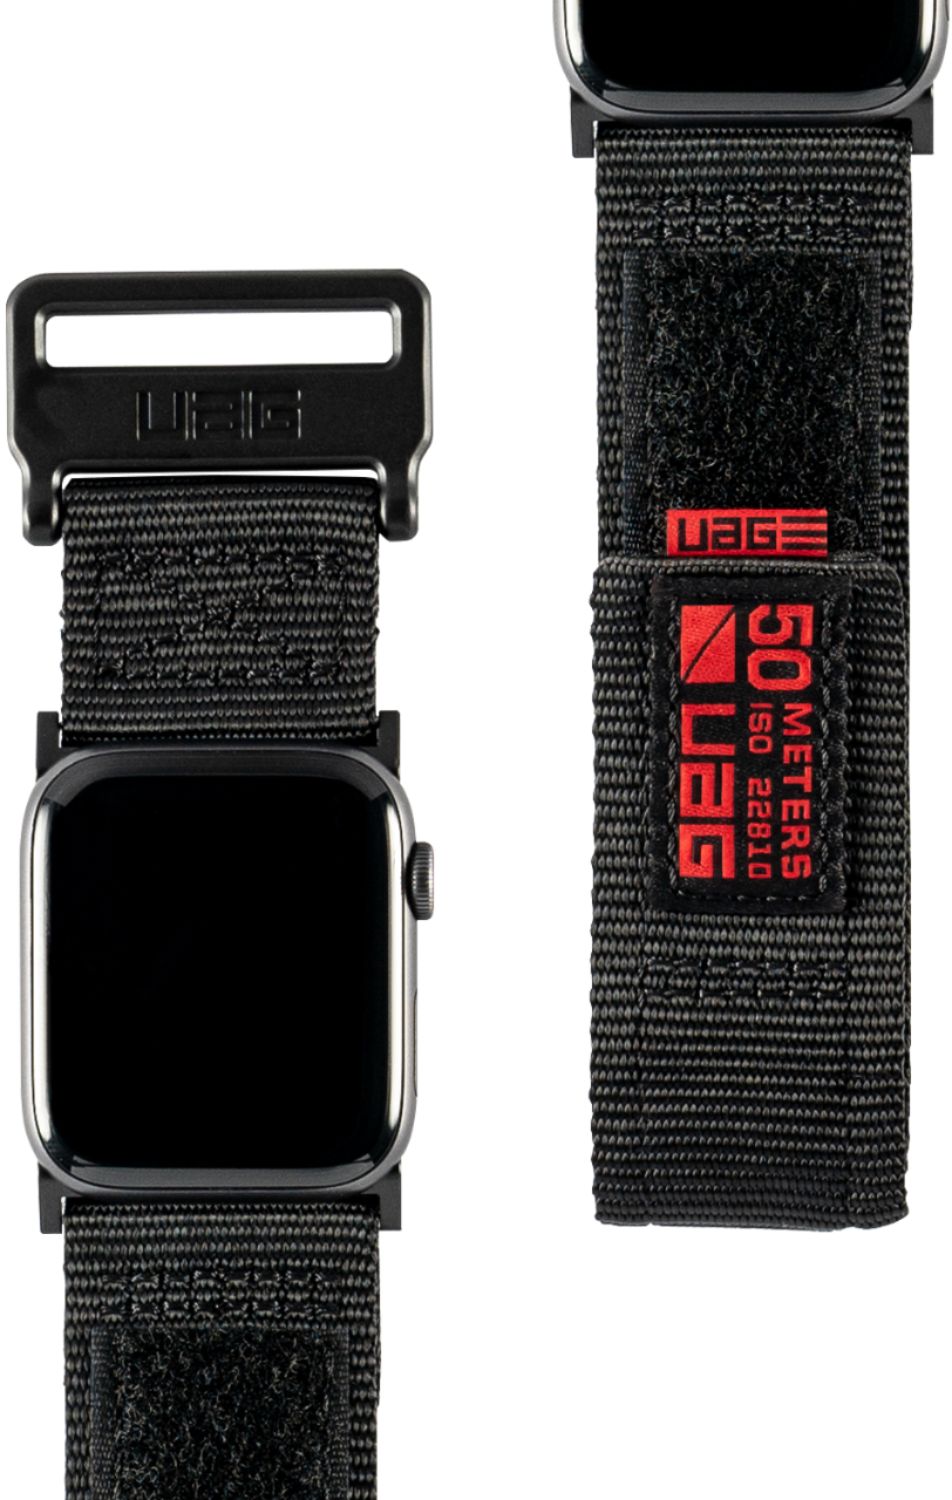 under armour apple watch band